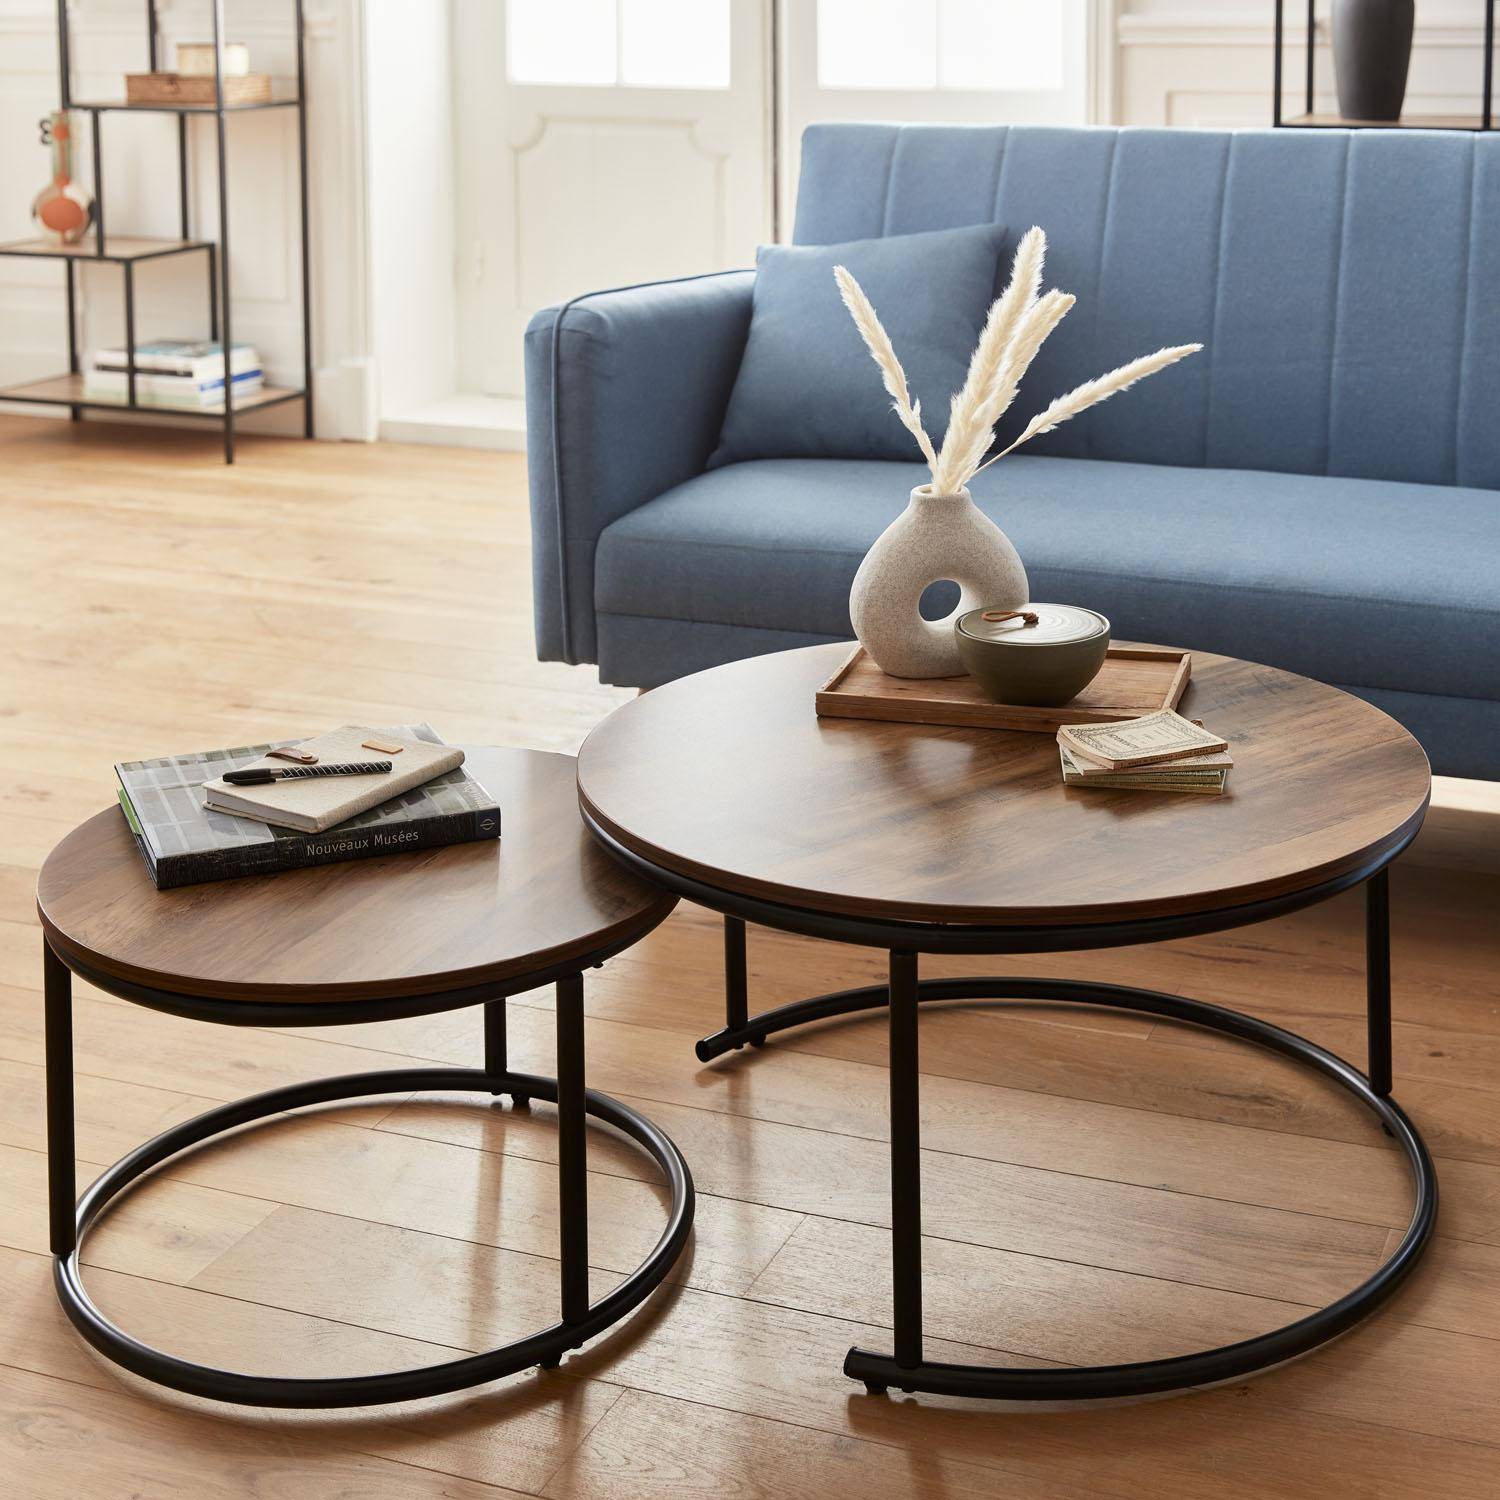 Pair of round, metal and wood-effect nesting coffee tables, 77x40x57cm - Loft Photo1